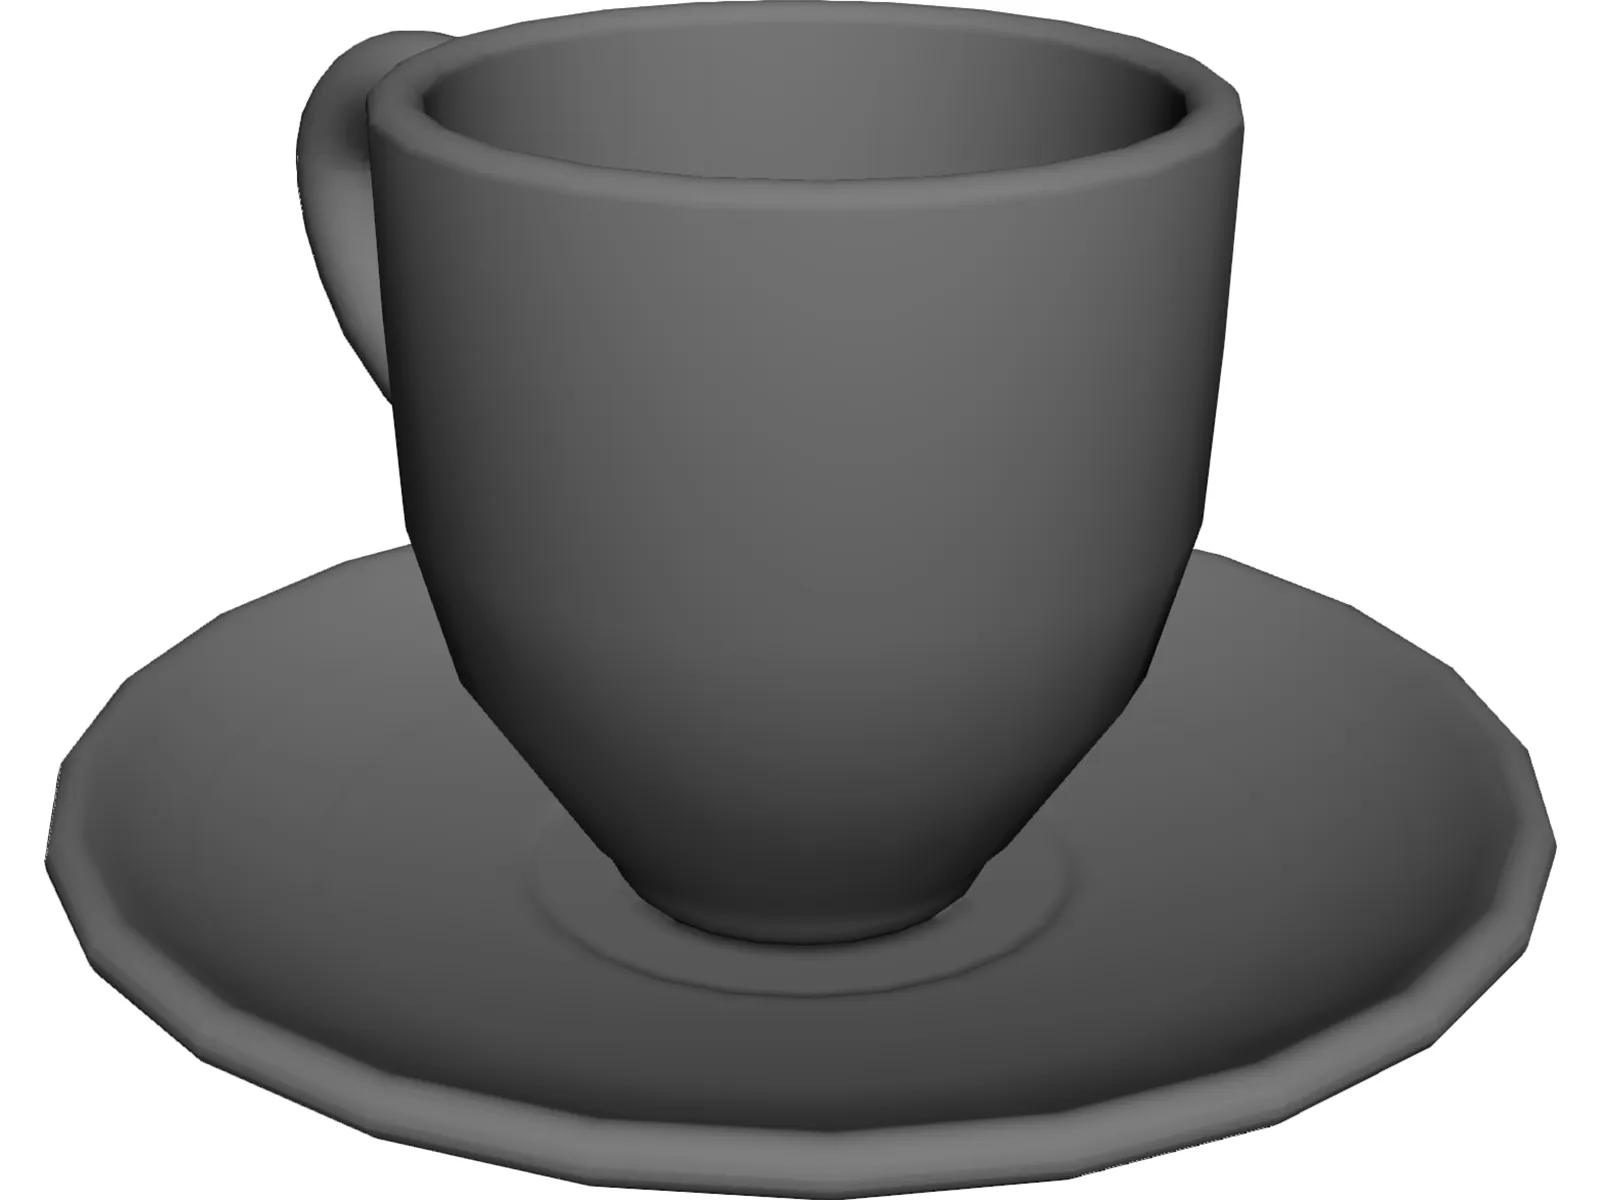 Cup Coffee 3D Model